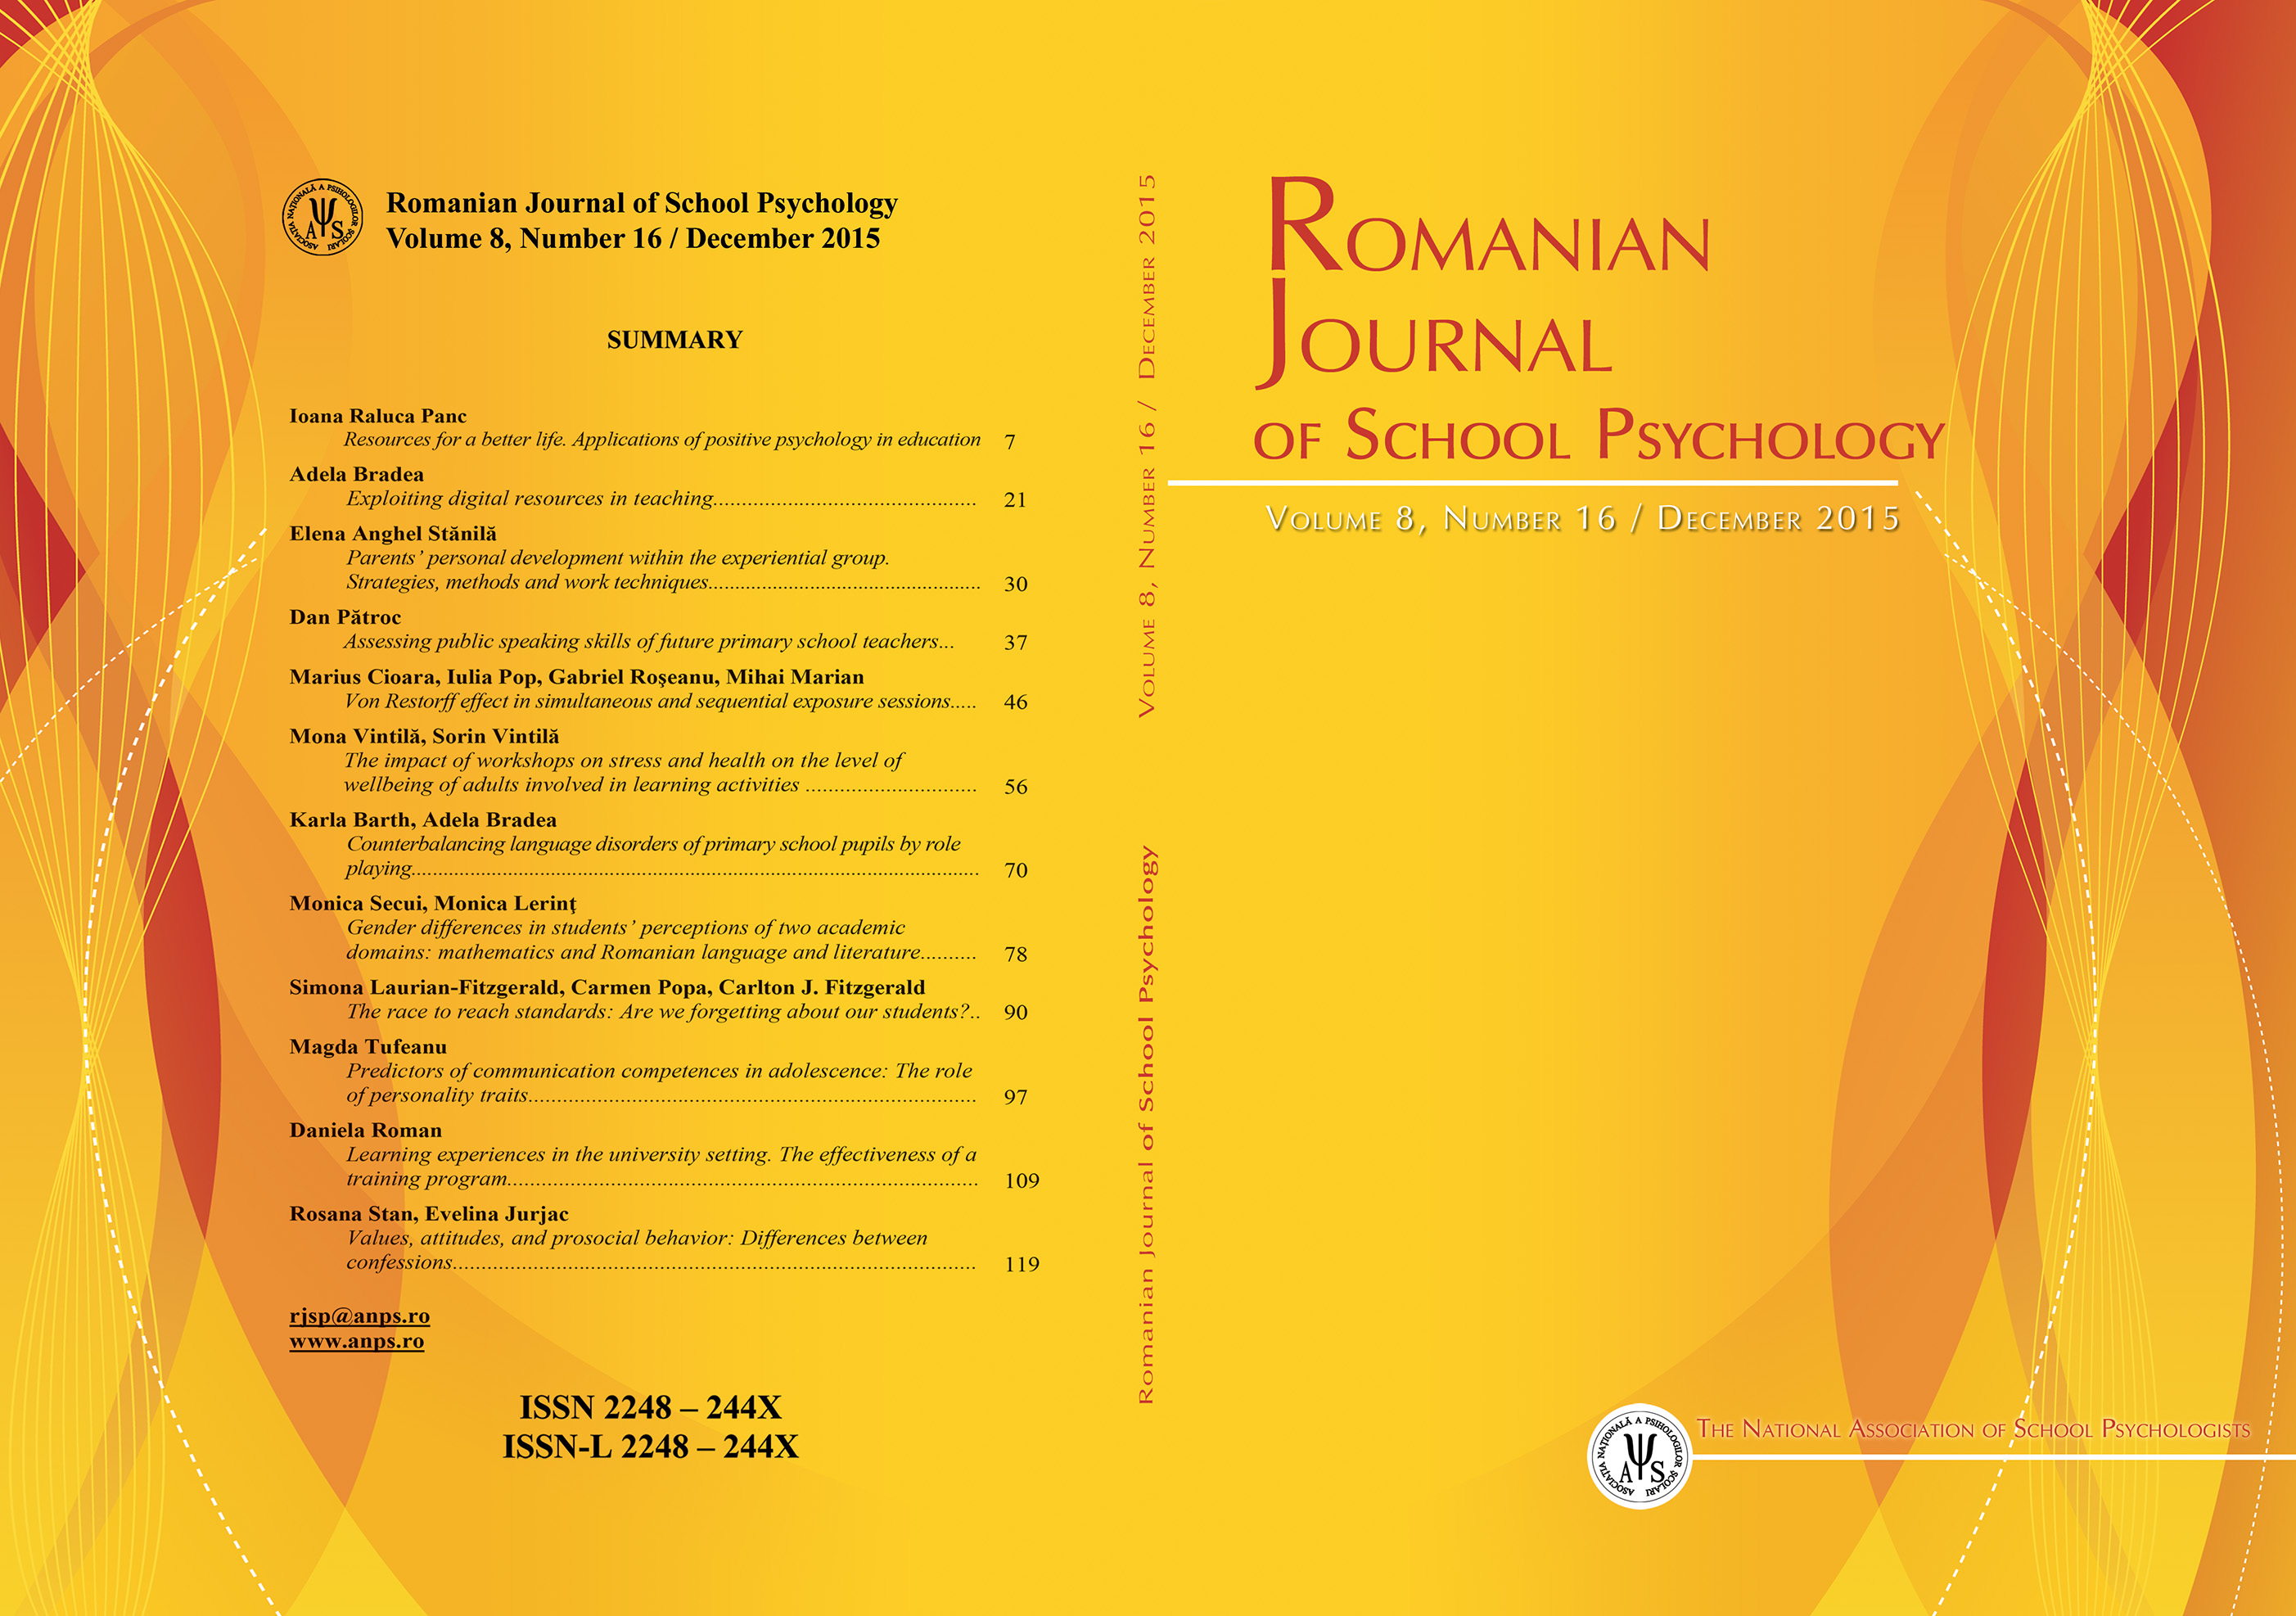 Von Restorff effect in simultaneous and sequential exposure sessions Cover Image